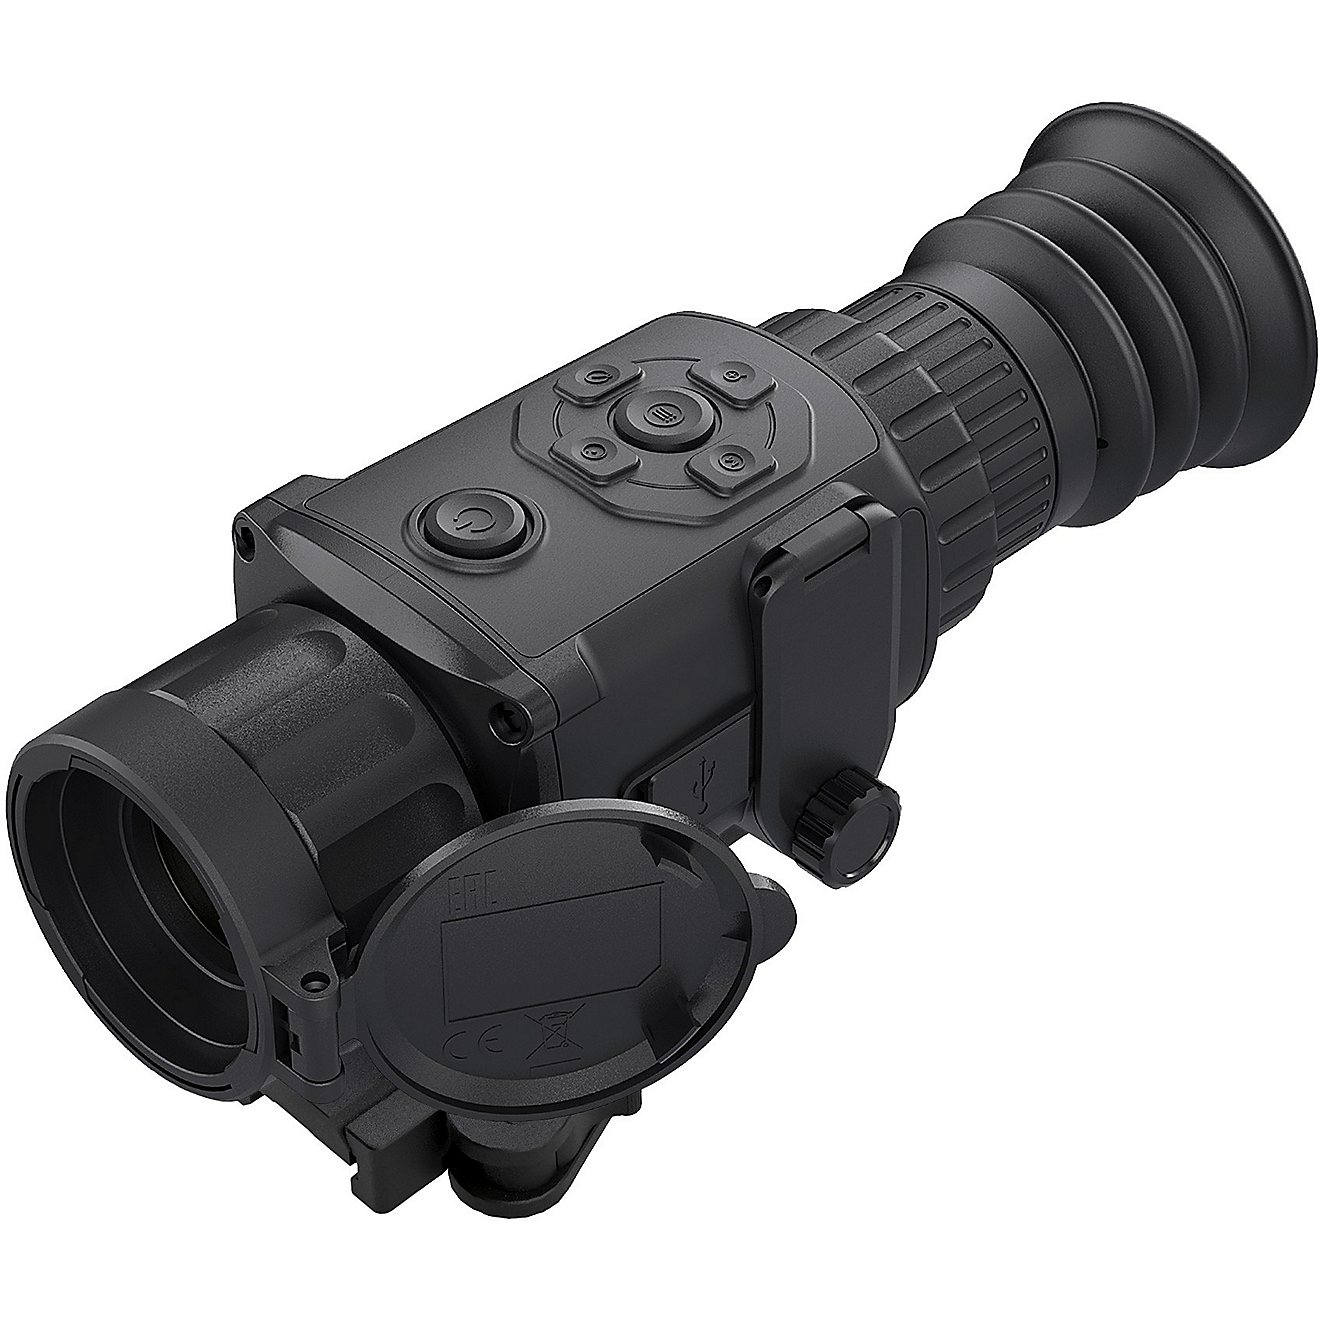 Black AGM Global Vision Thermal Scope Rattler TS19-256 Thermal Imaging Rifle Scope 256x192 50 Hz 19 mm Lens 